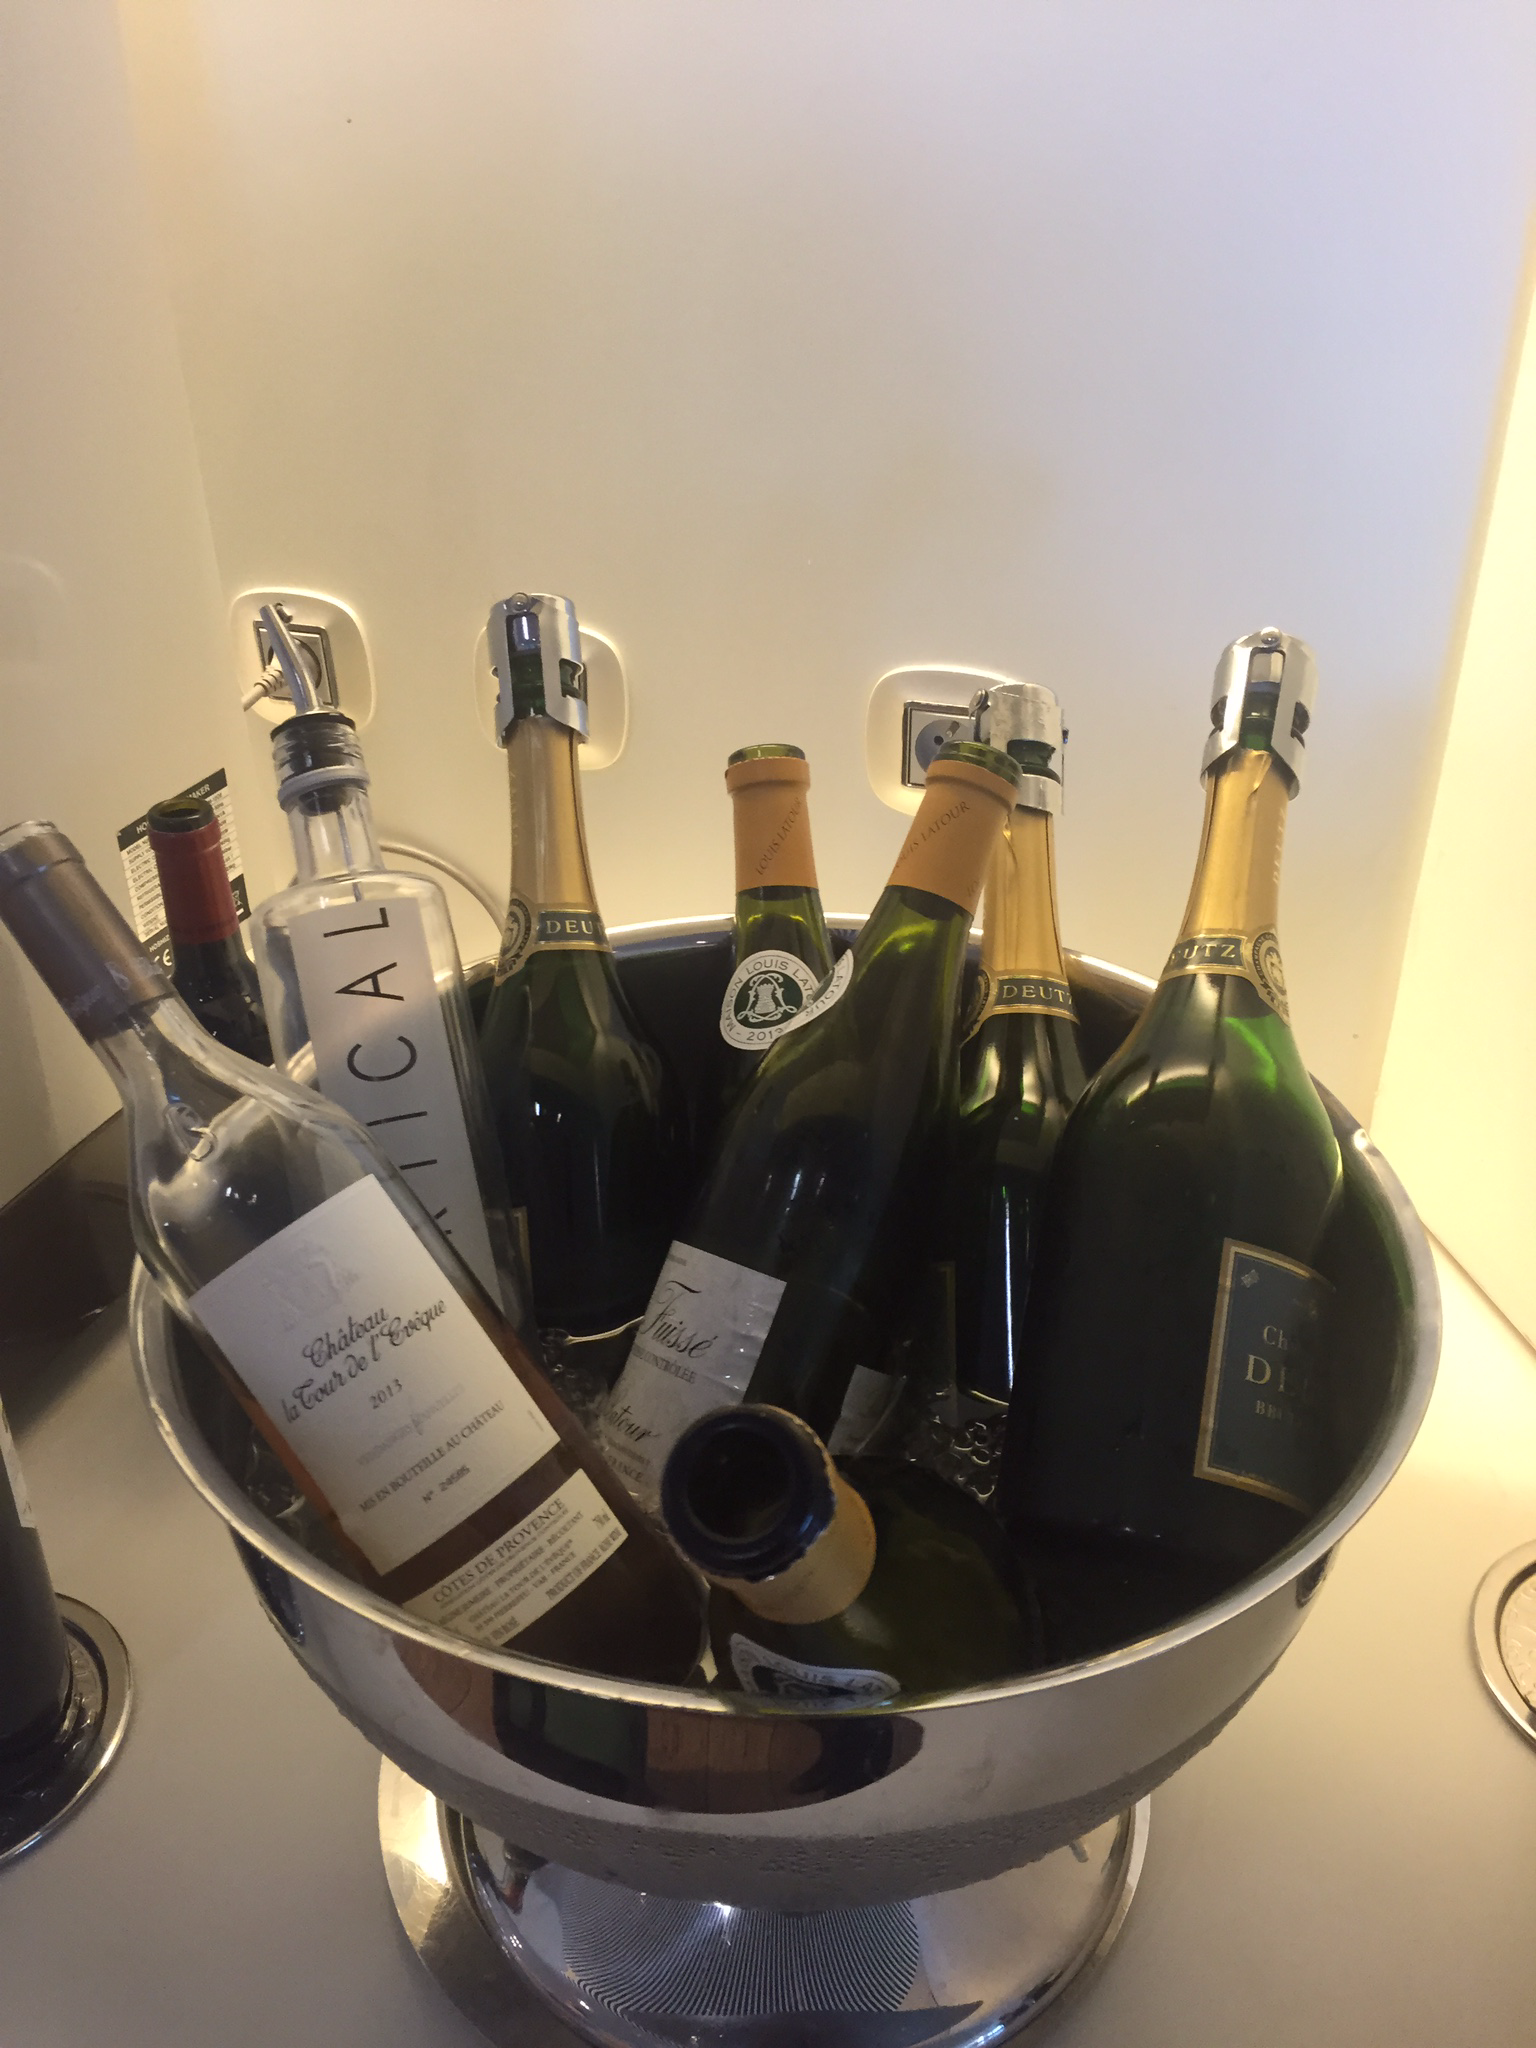 Champagne and wine offerings